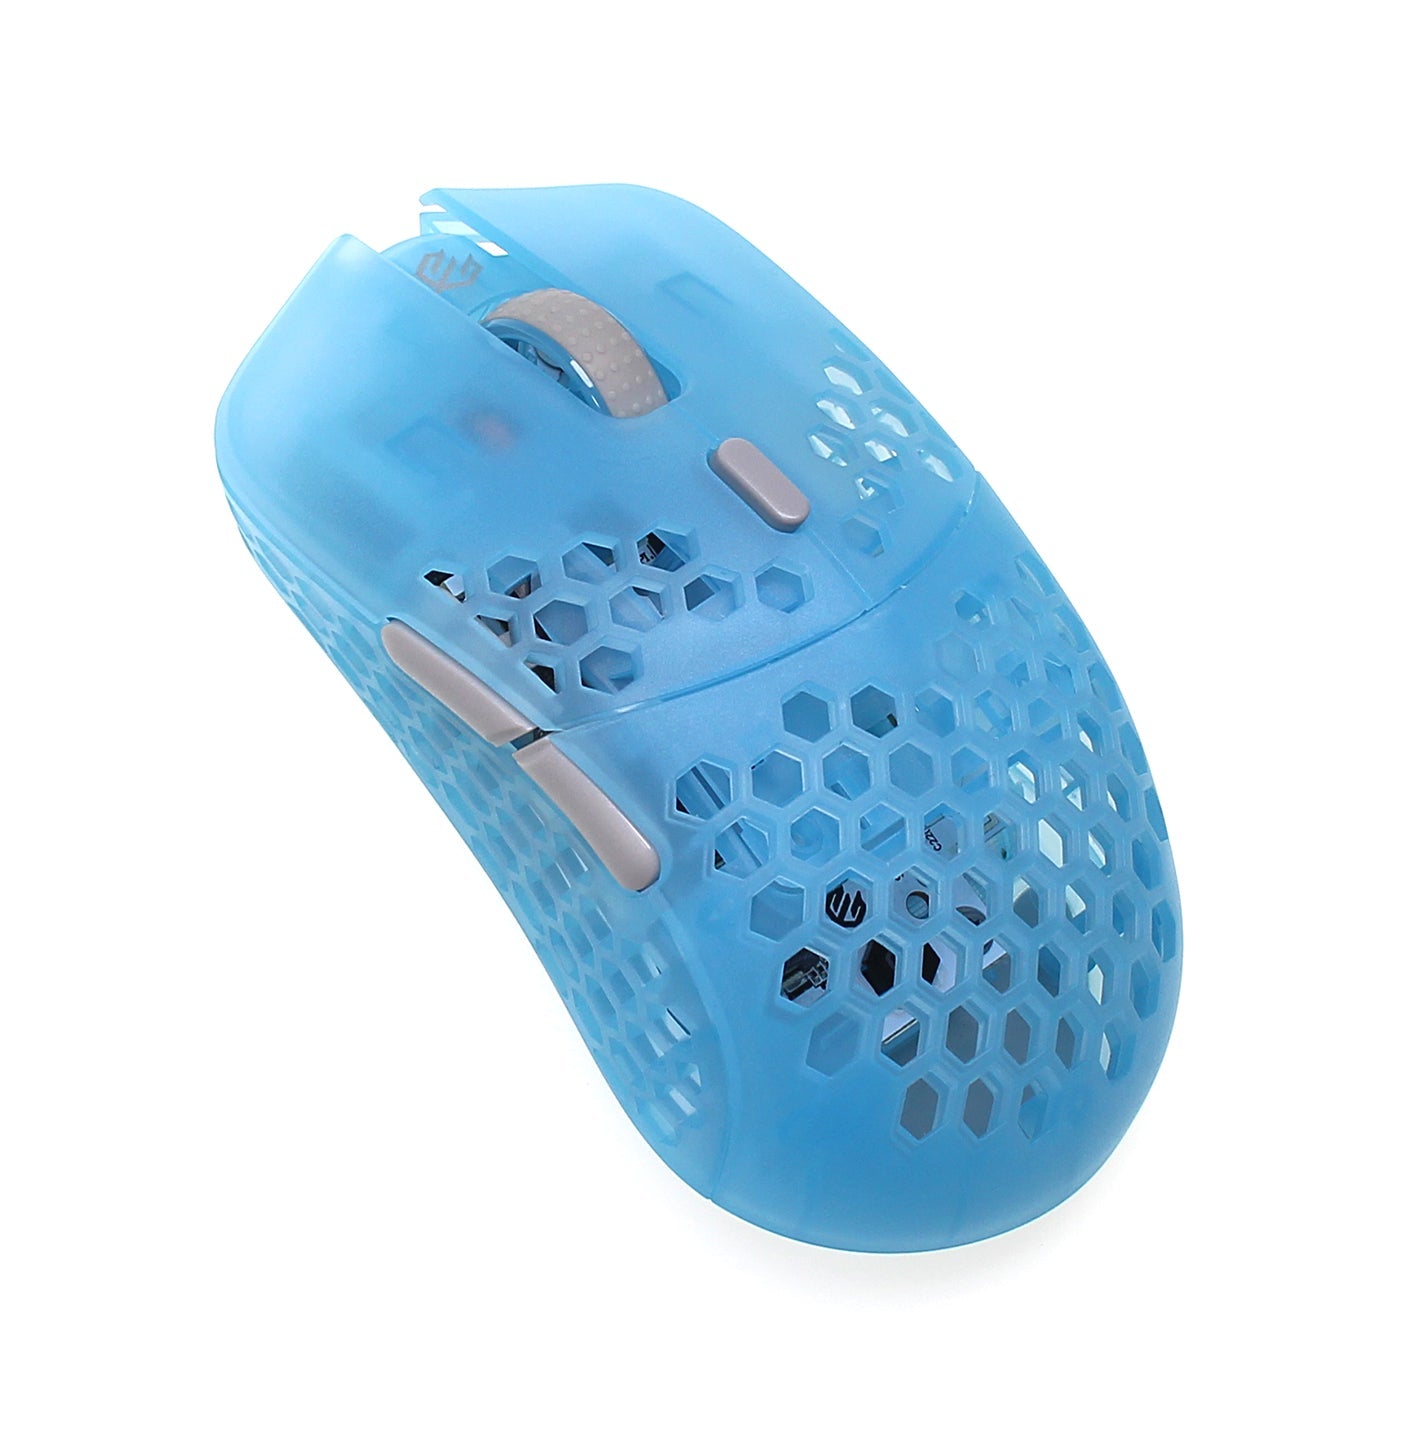 G-wolves Hati Small HTS Transparent Blue Wireless Gaming Mouse 